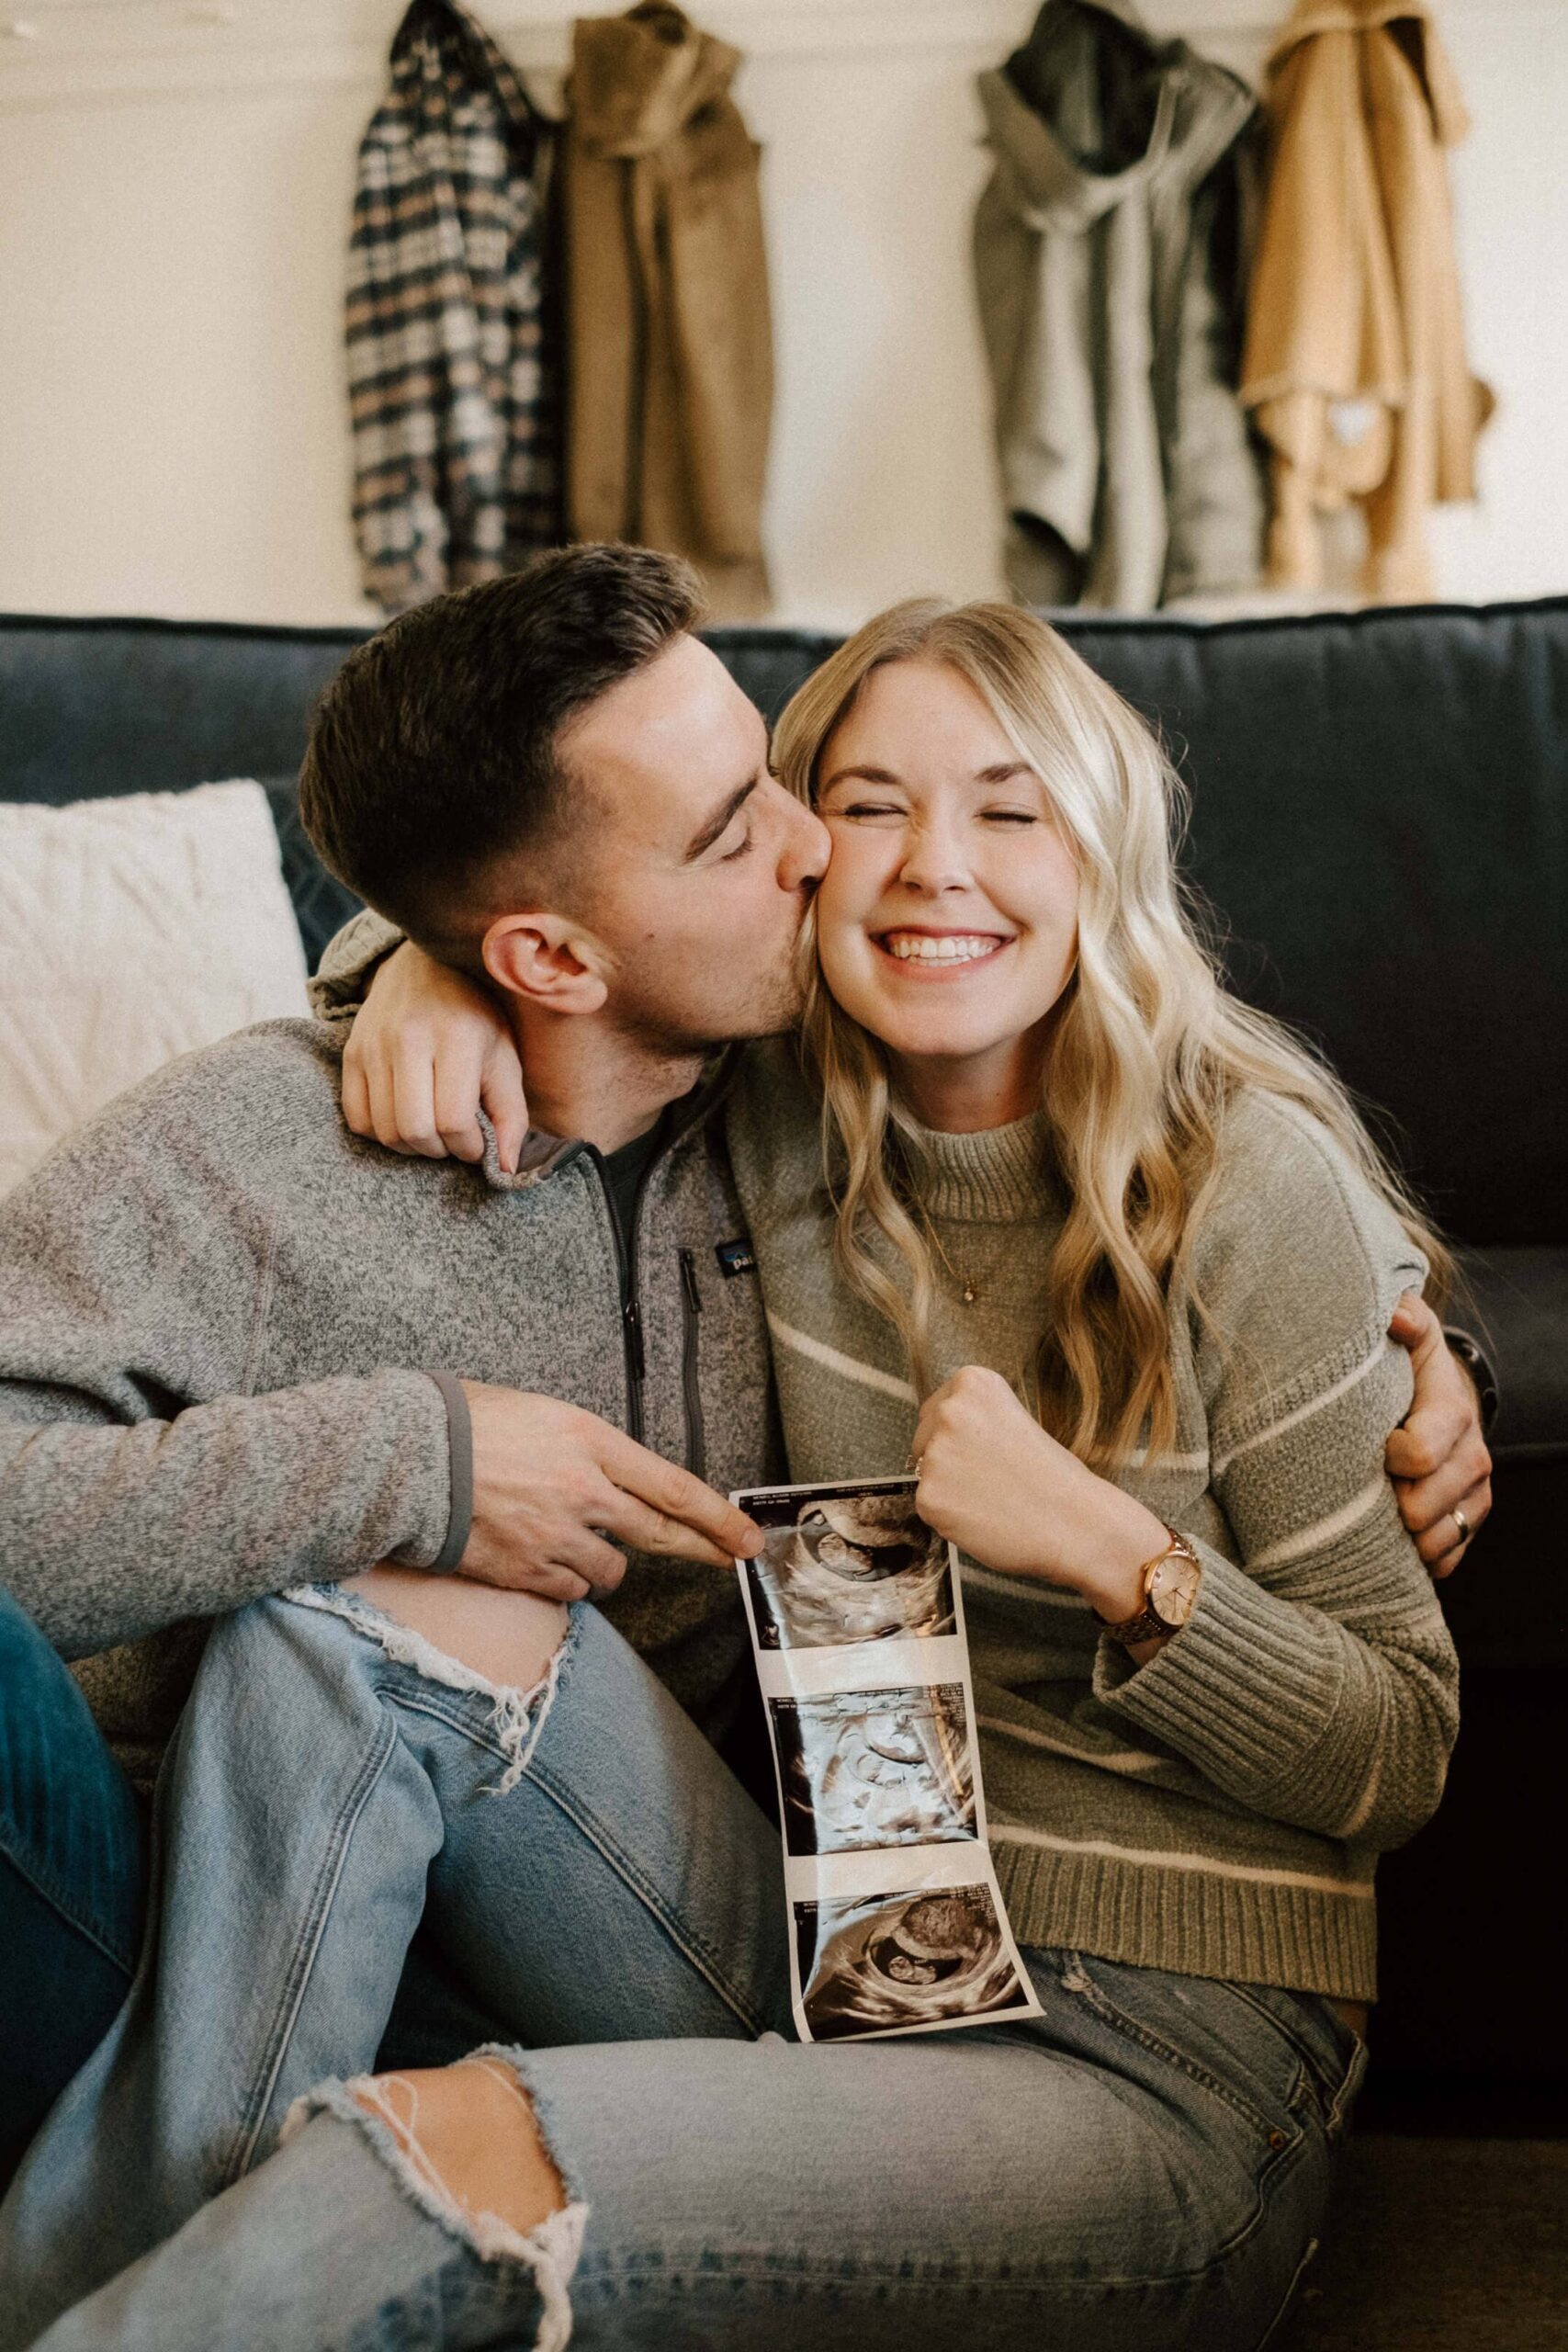 Happy couple showing off their sonogram at their home photoshoot in St. Louis, Missouri, captured with a nostalgic film aesthetic by Stacey Vandas Photography.